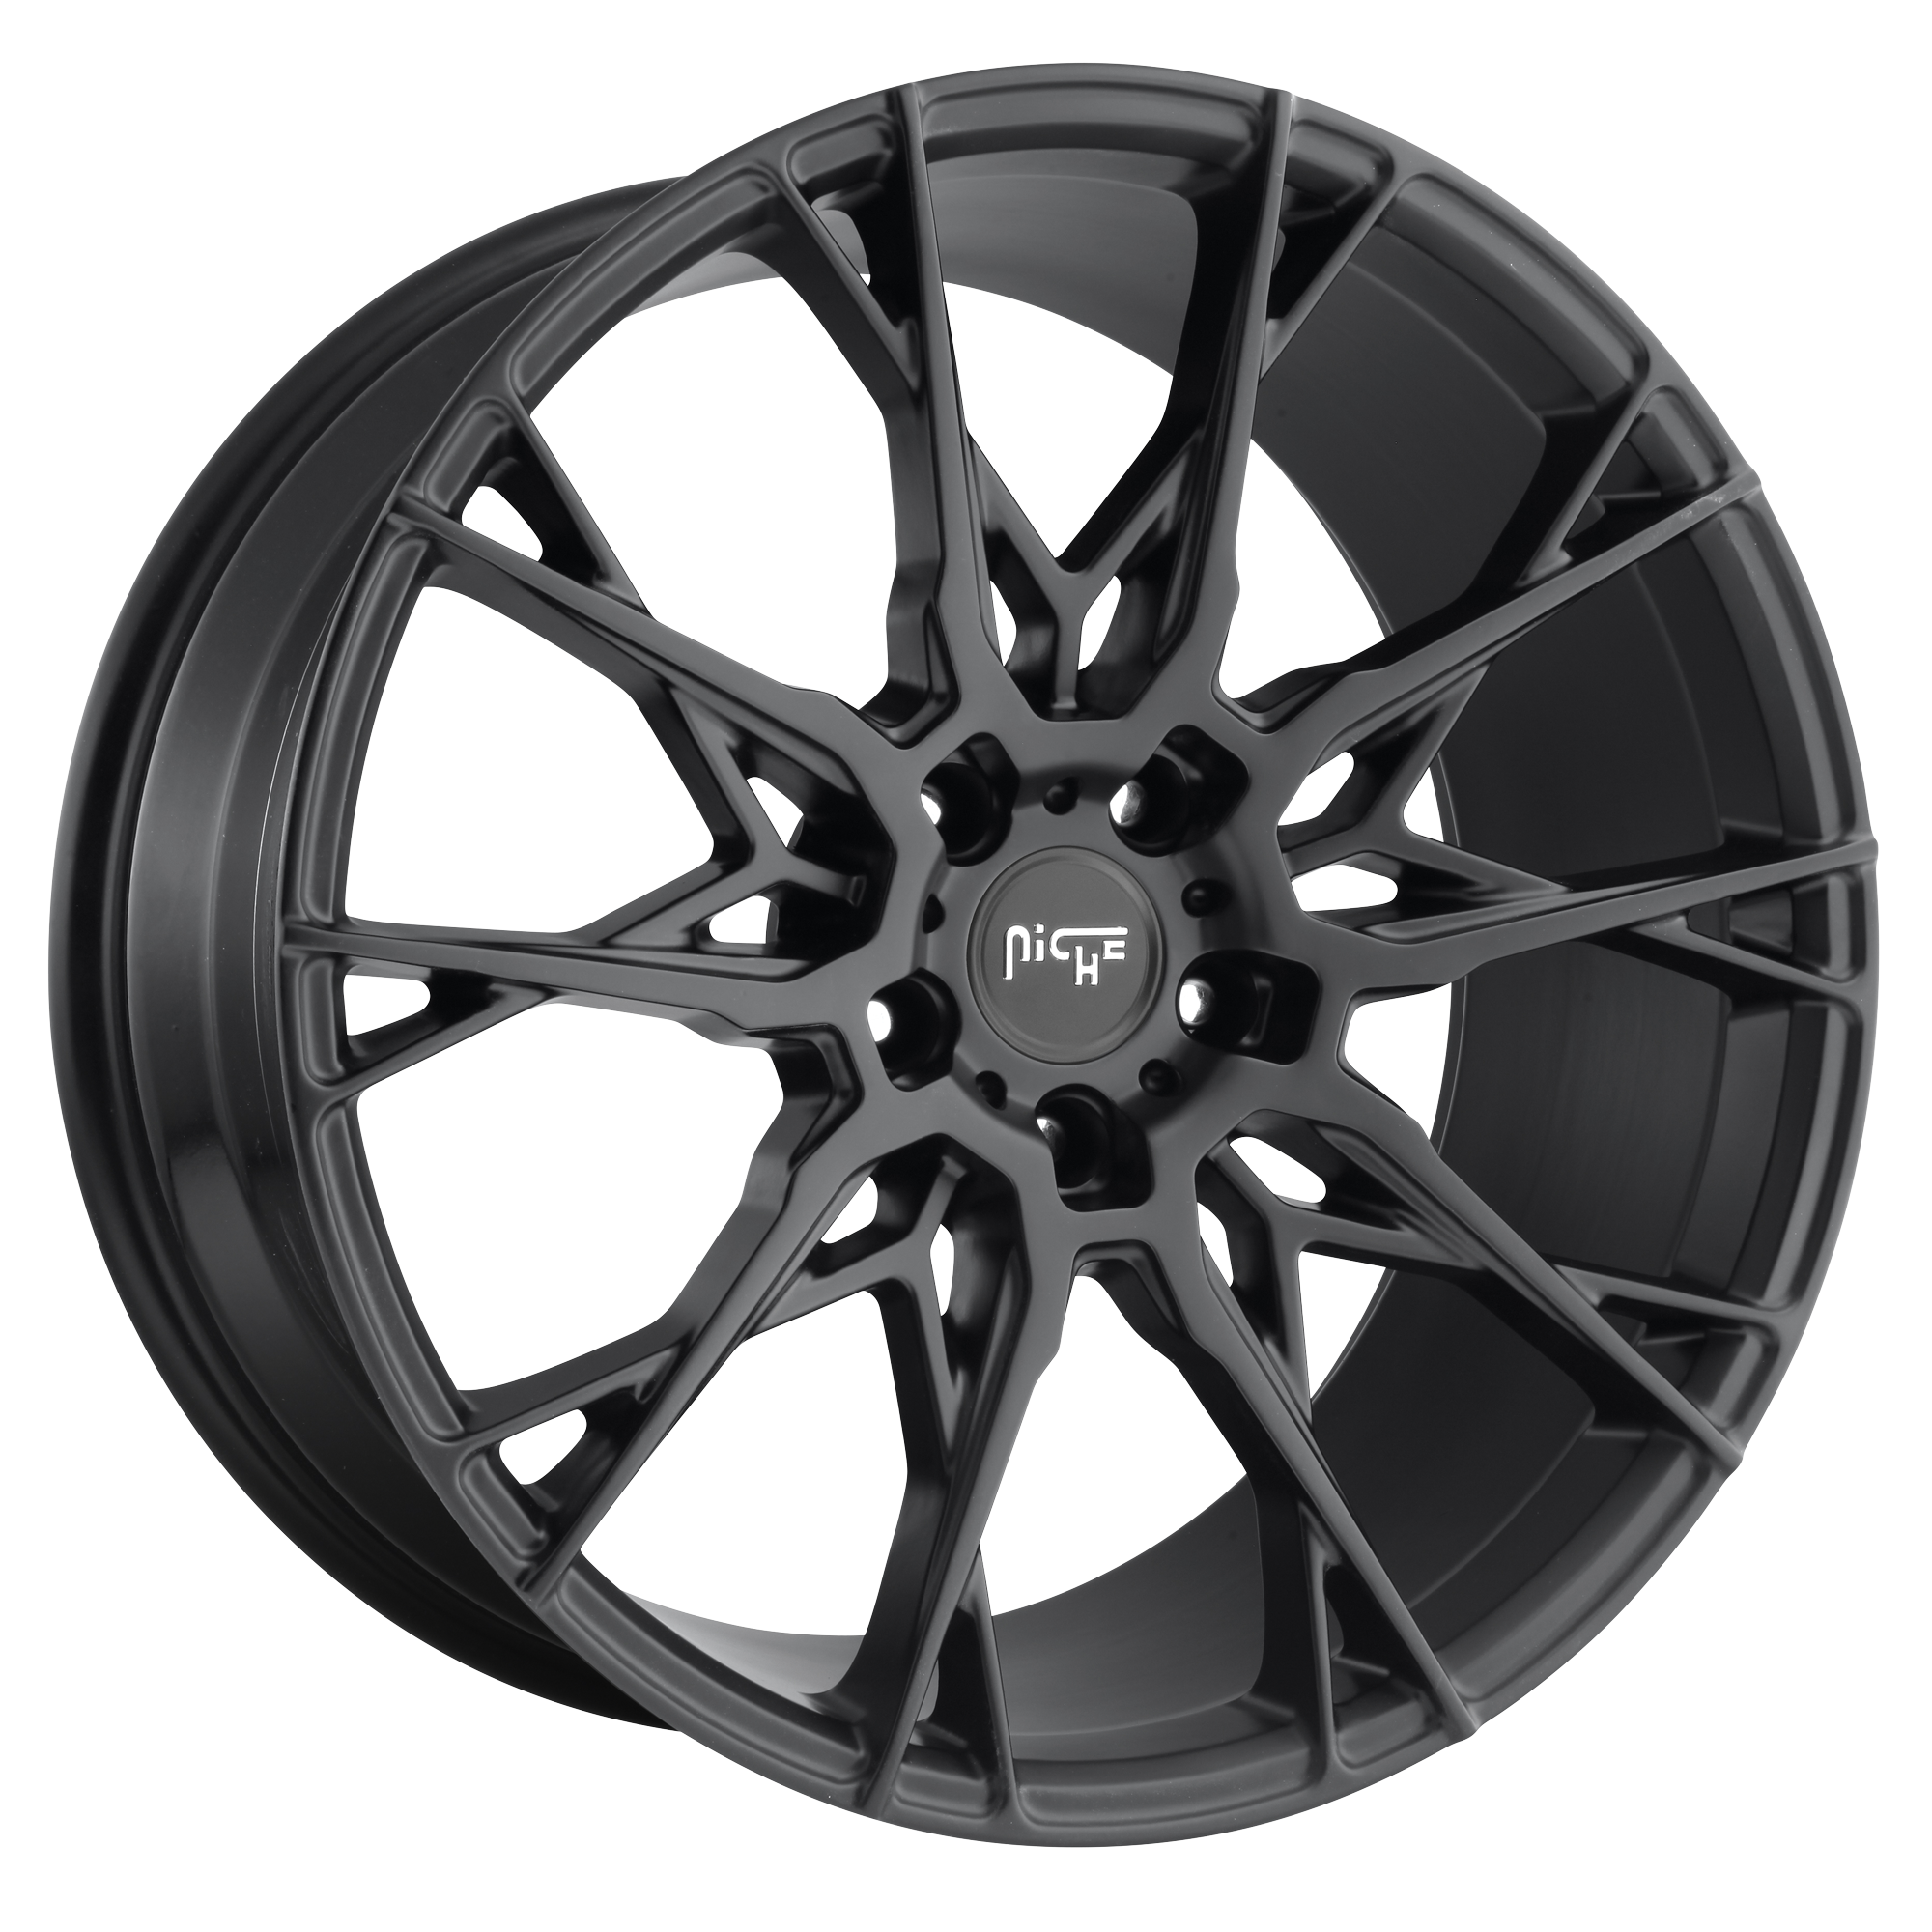 STACCATO 18x8.5 5x114.30 MATTE BLACK (35 mm) - Tires and Engine Performance